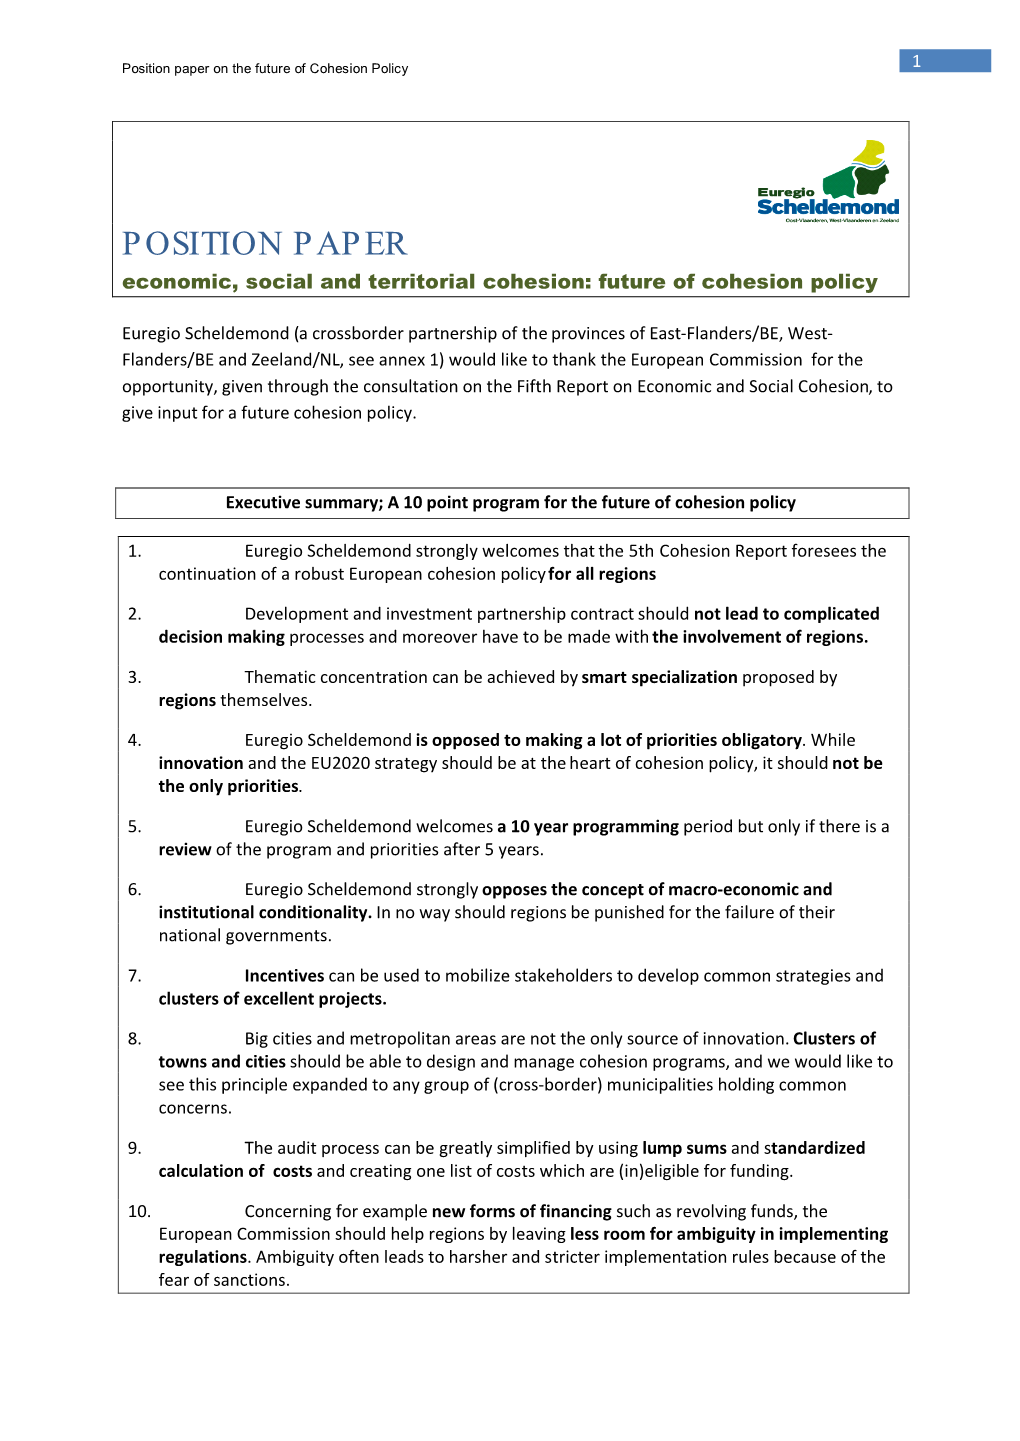 Position Paper on the Future of Cohesion Policy 1